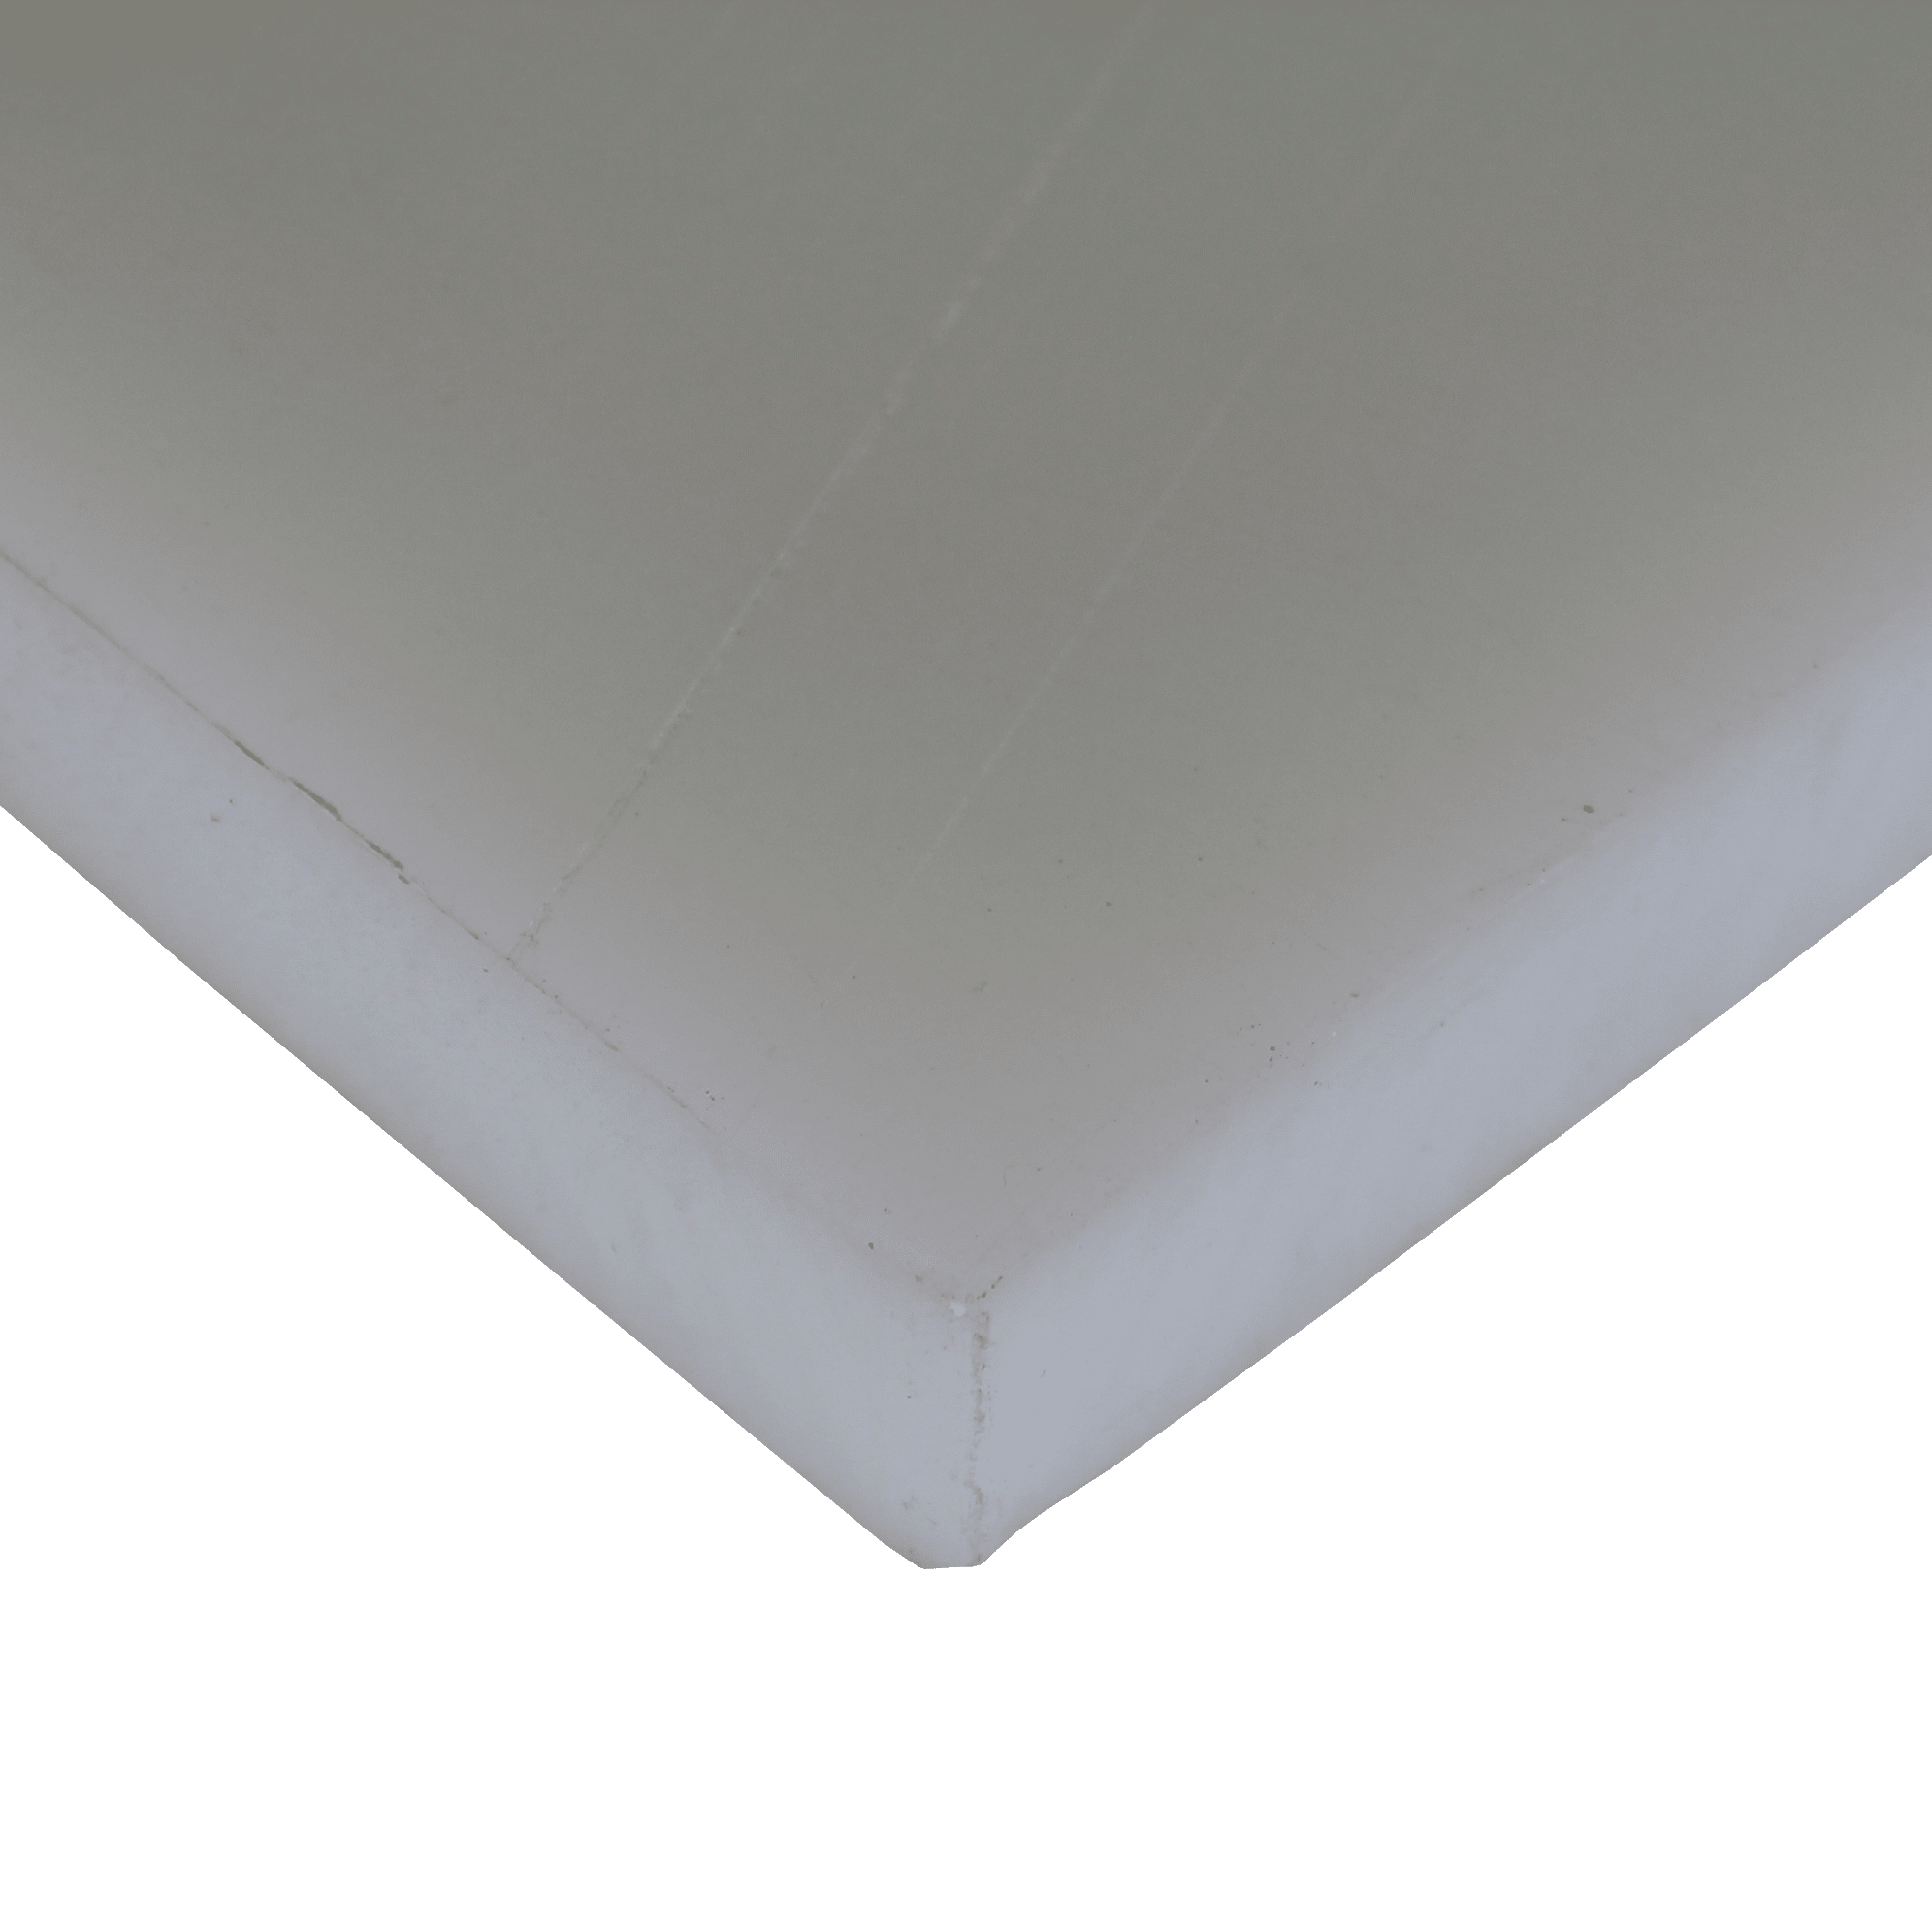 https://lep.co.nz/wp-content/uploads/2016/01/Cutting-board-HDPE-smooth-sheet.png